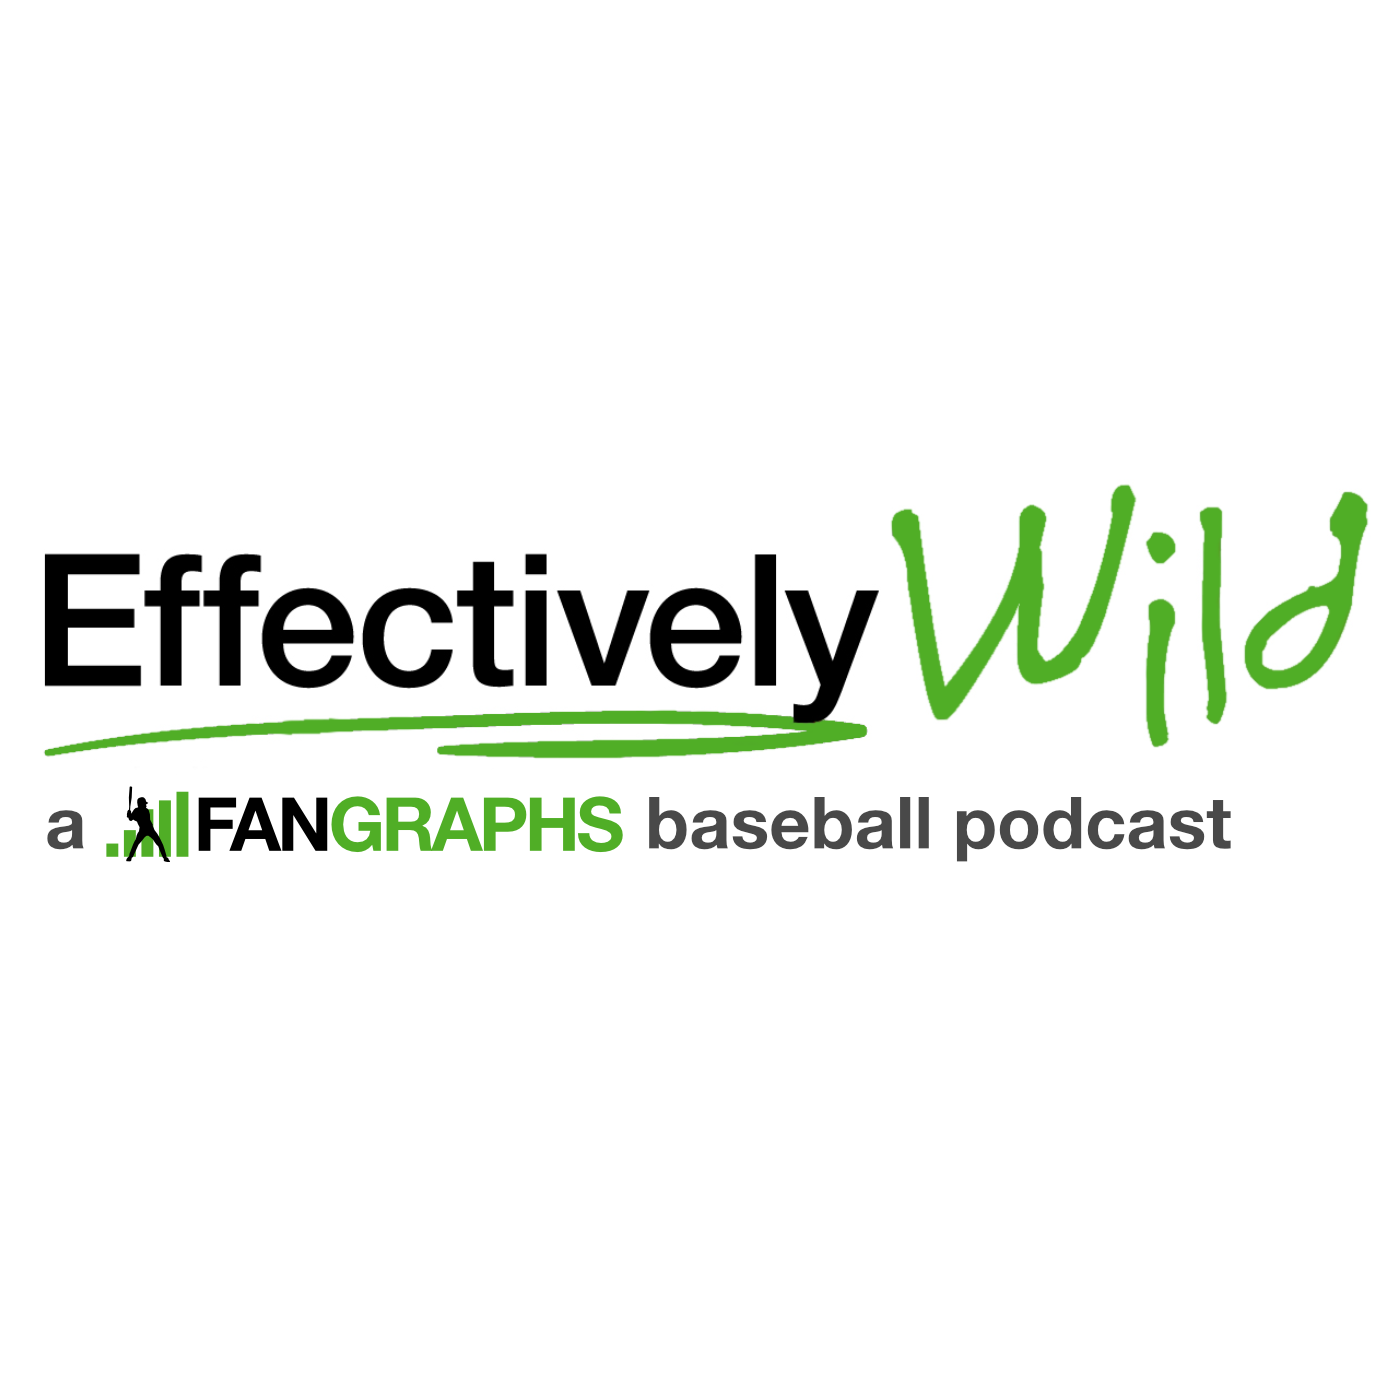 A highlight from Effectively Wild Episode 2011: Who Was That Mascot Man?